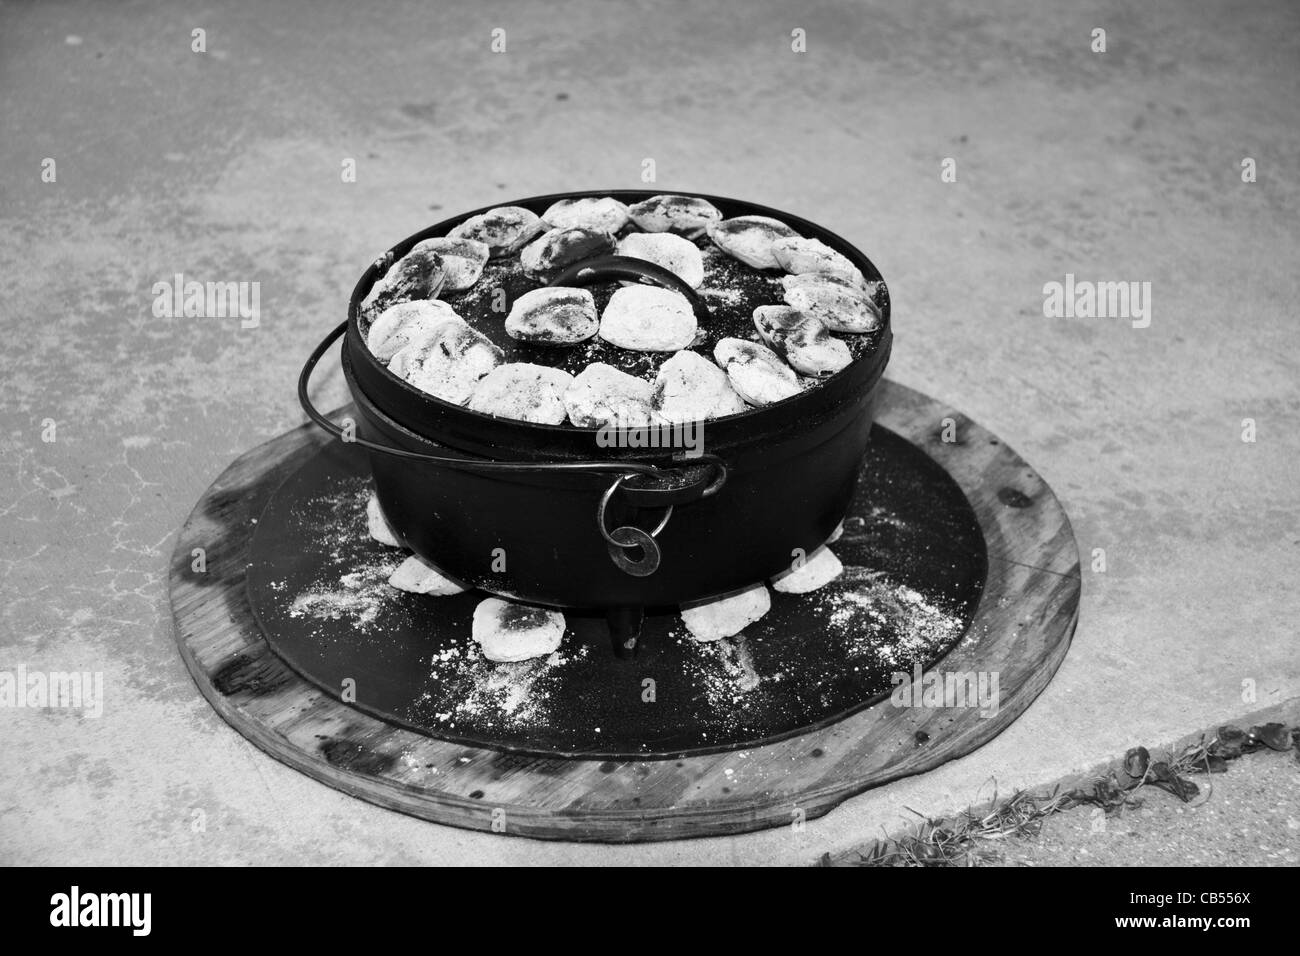 Dutch Oven outdoor cooking using cast iron pots with metal base support. Coals are placed above and below pot. Stock Photo